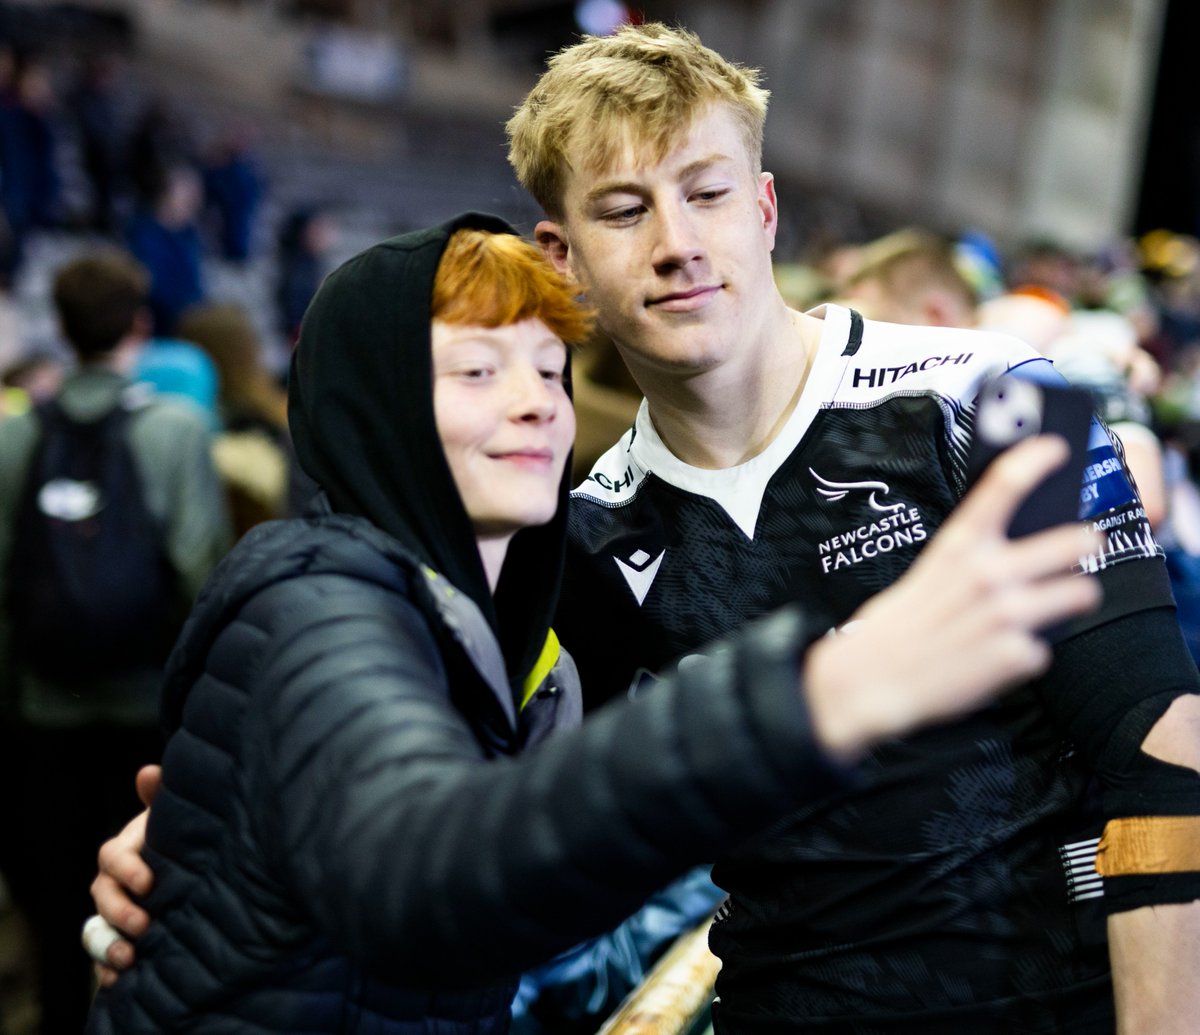 FalconsRugby tweet picture